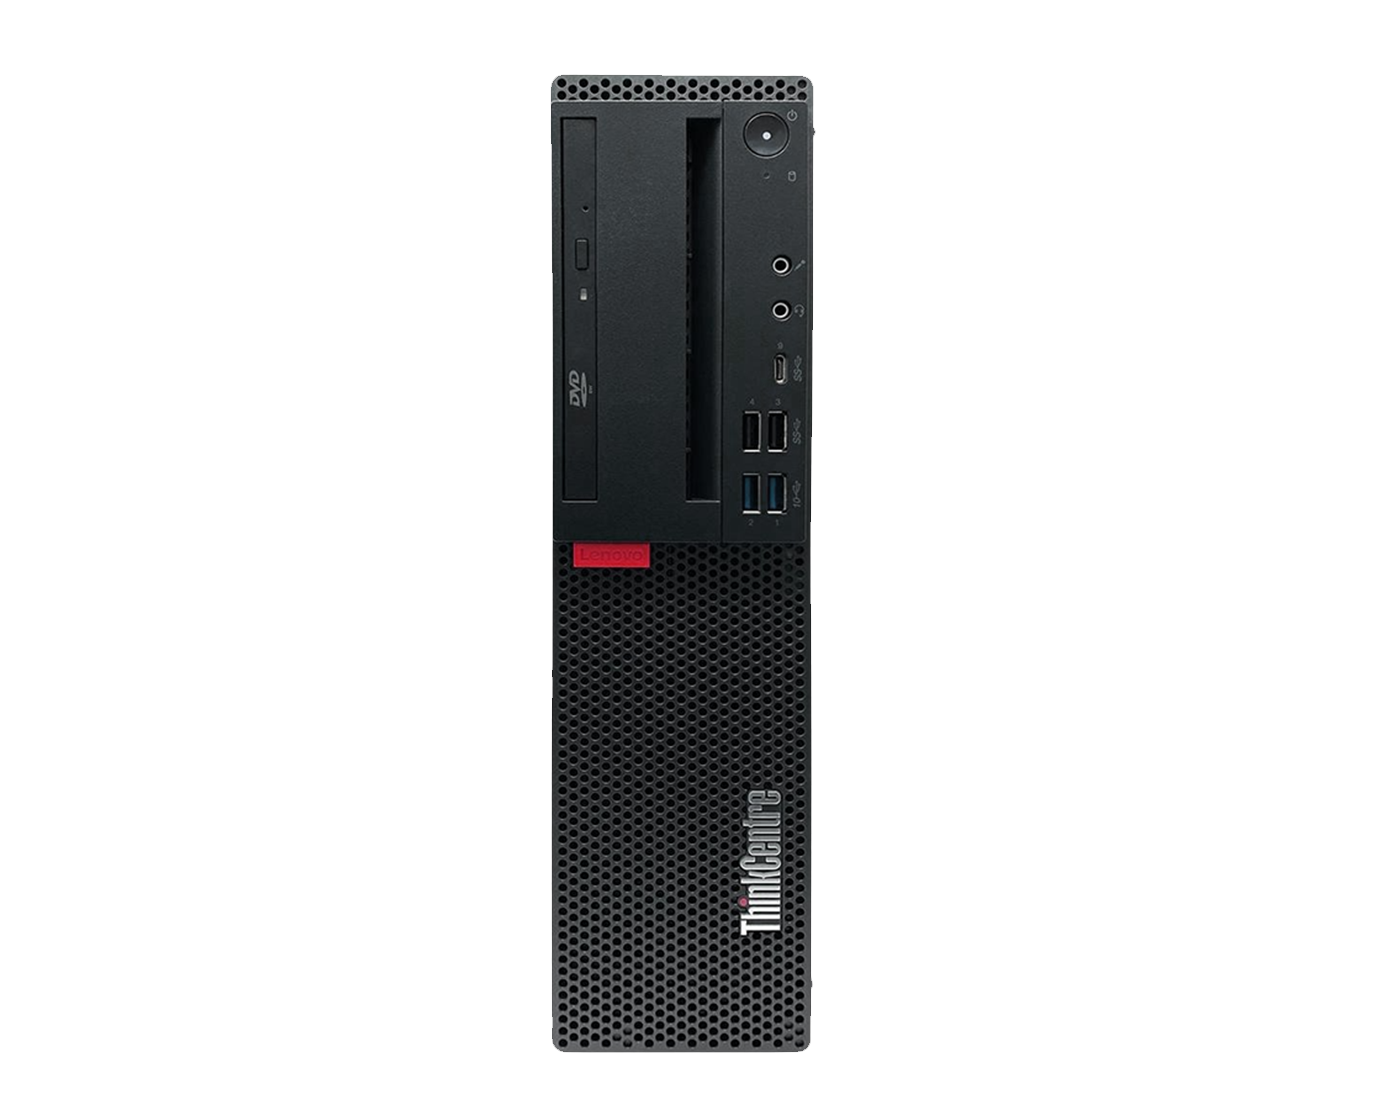 Pack Lenovo Thinkcentre M920s + Asus Be24a / Core I5 8500 3ghz / 8Gb ram / 500Gb / 24" ergonómico / Win 10 Pro ¡Ex-demo!